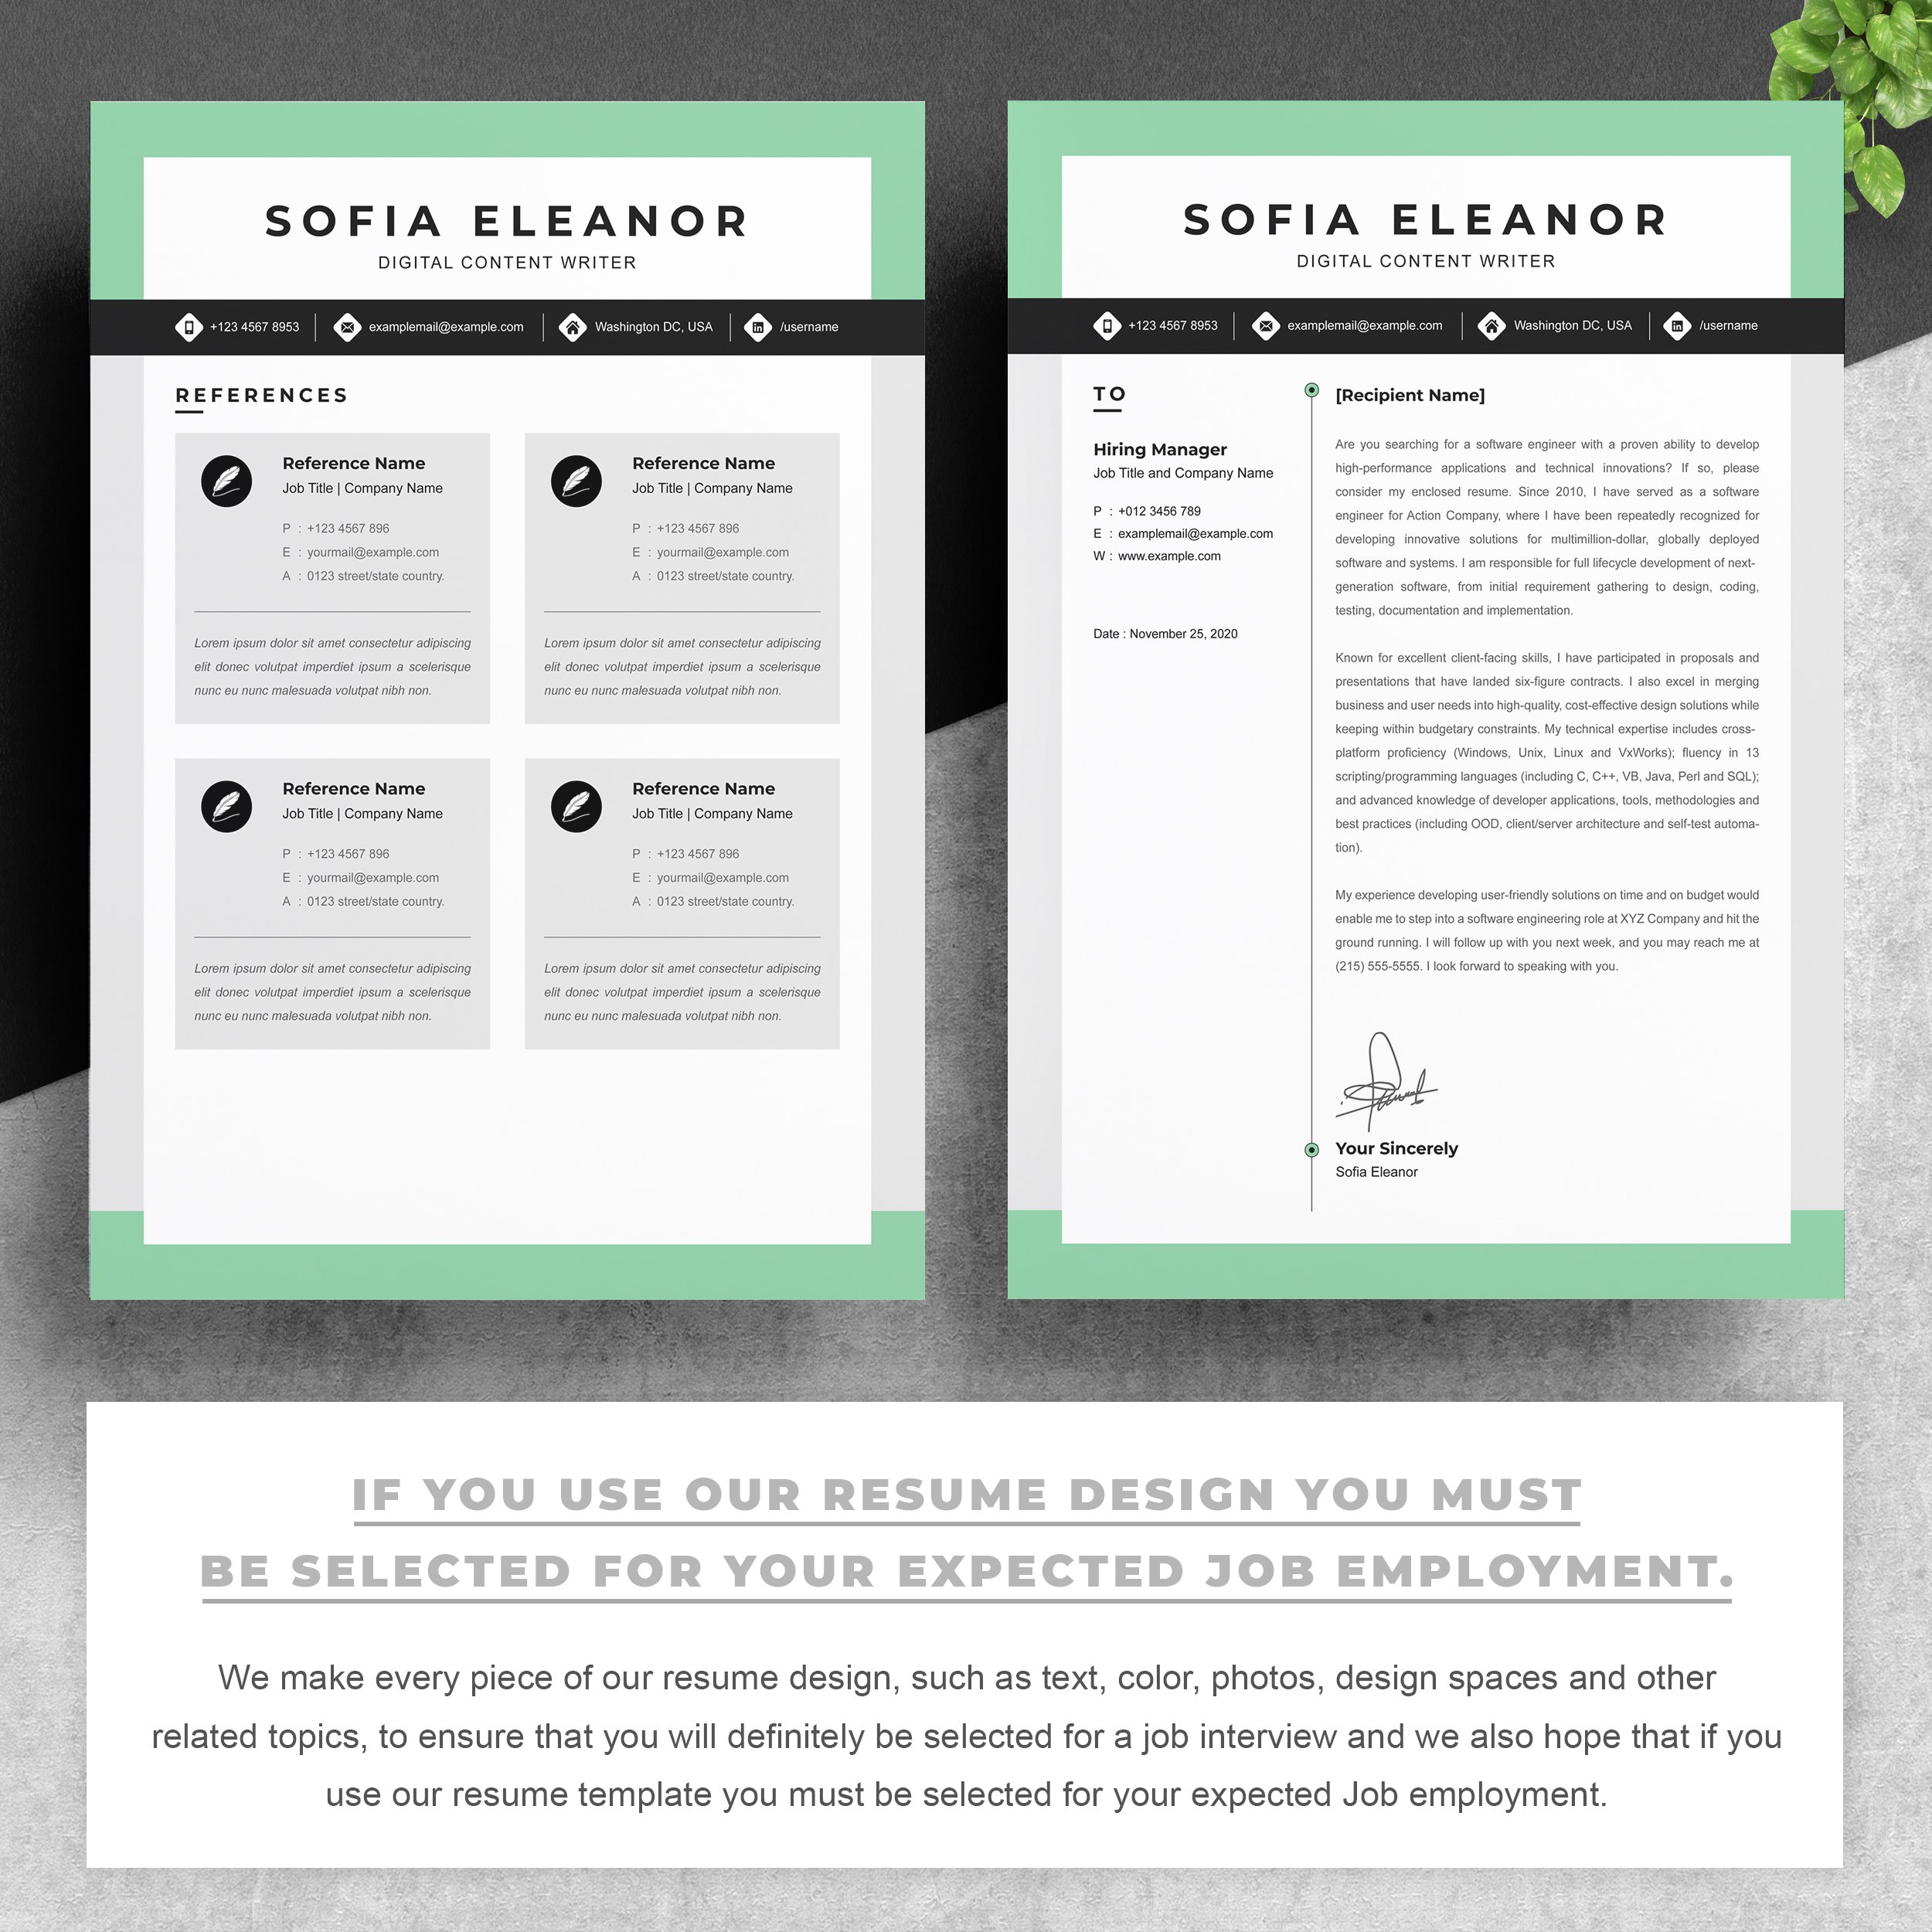 03 2 pages free resume design template copy 567